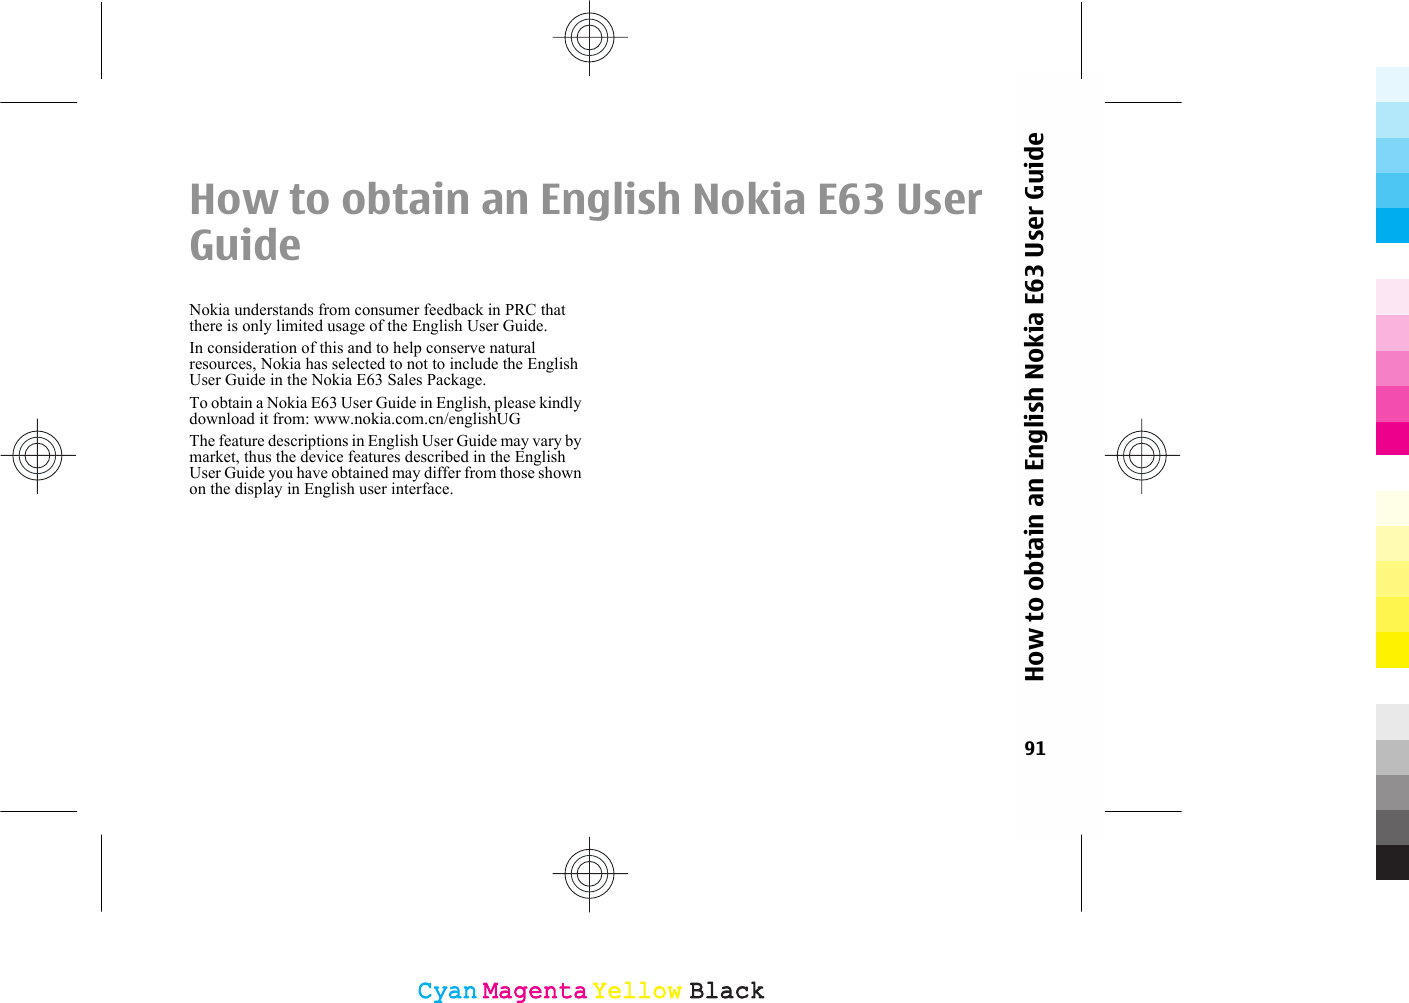 How to obtain an English Nokia E63 UserGuideNokia understands from consumer feedback in PRC thatthere is only limited usage of the English User Guide.In consideration of this and to help conserve naturalresources, Nokia has selected to not to include the EnglishUser Guide in the Nokia E63 Sales Package.To obtain a Nokia E63 User Guide in English, please kindlydownload it from: www.nokia.com.cn/englishUGThe feature descriptions in English User Guide may vary bymarket, thus the device features described in the EnglishUser Guide you have obtained may differ from those shownon the display in English user interface.91How to obtain an English Nokia E63 User GuideCyanCyanMagentaMagentaYellowYellowBlackBlack